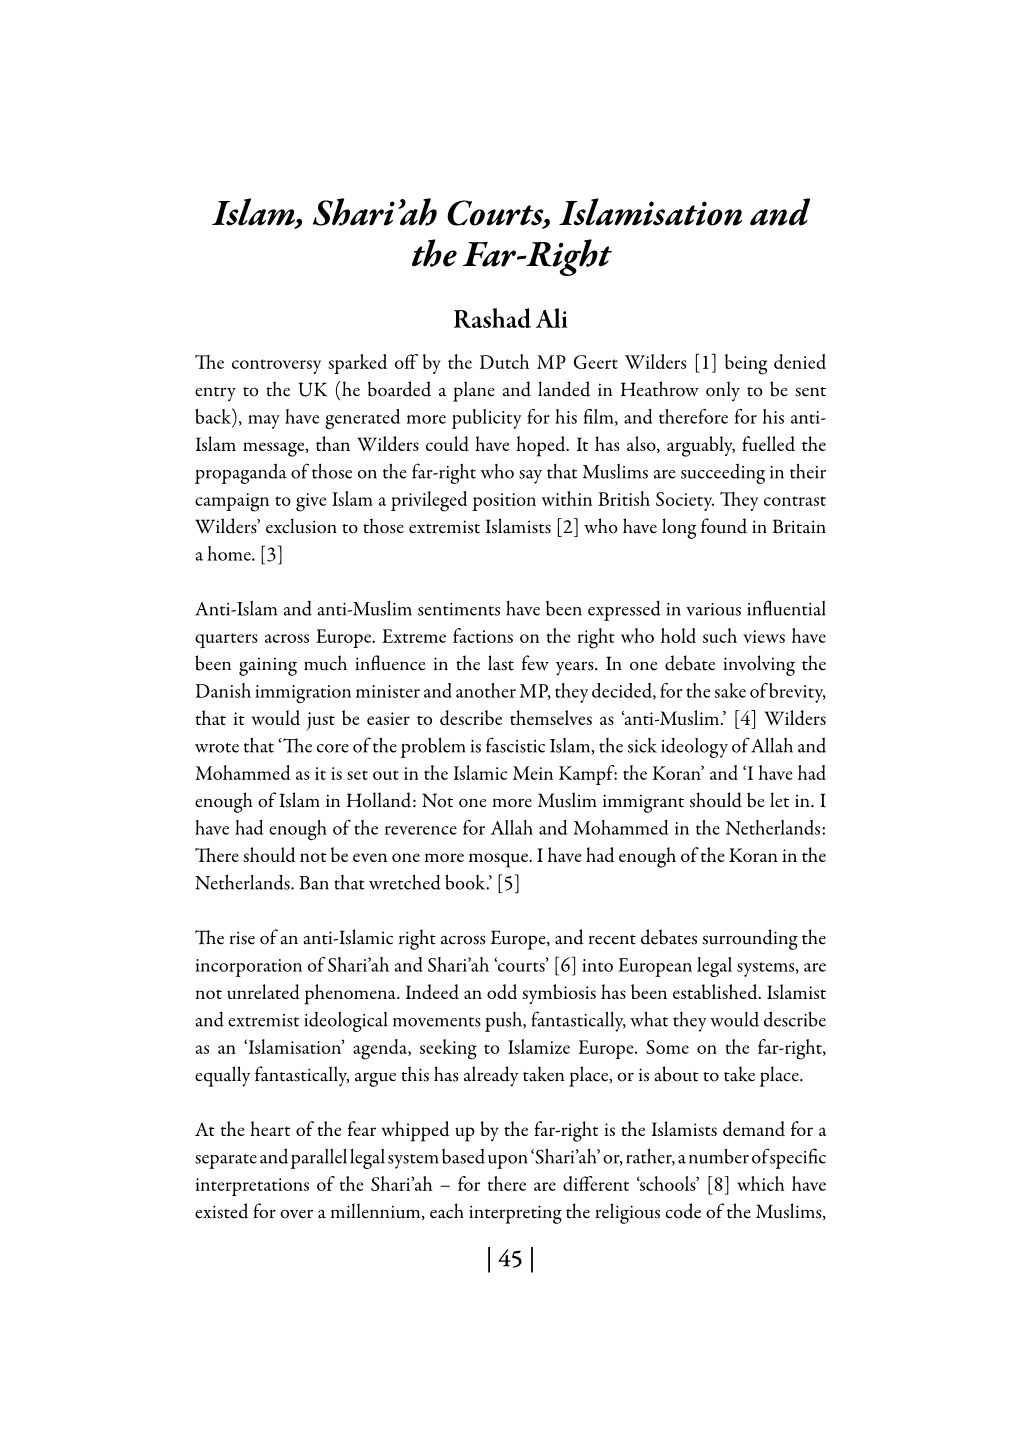 Islam, Shari'ah Courts, Islamisation and the Far-Right